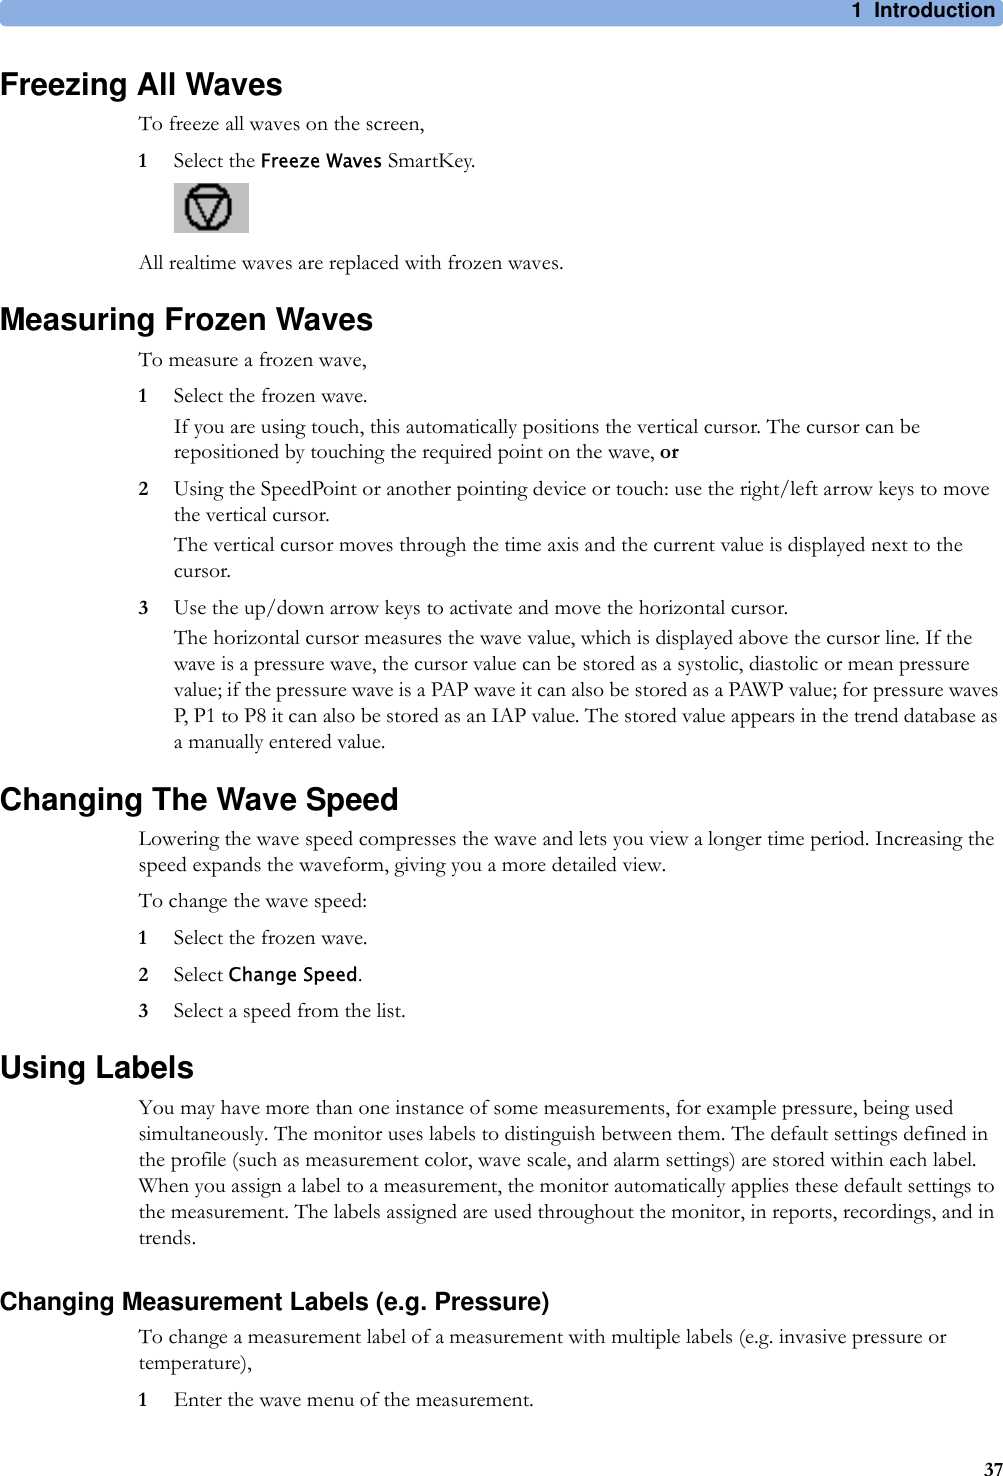 1 Introduction37Freezing All WavesTo freeze all waves on the screen,1Select the Freeze Waves SmartKey.All realtime waves are replaced with frozen waves.Measuring Frozen WavesTo measure a frozen wave,1Select the frozen wave.If you are using touch, this automatically positions the vertical cursor. The cursor can be repositioned by touching the required point on the wave, or2Using the SpeedPoint or another pointing device or touch: use the right/left arrow keys to move the vertical cursor.The vertical cursor moves through the time axis and the current value is displayed next to the cursor.3Use the up/down arrow keys to activate and move the horizontal cursor.The horizontal cursor measures the wave value, which is displayed above the cursor line. If the wave is a pressure wave, the cursor value can be stored as a systolic, diastolic or mean pressure value; if the pressure wave is a PAP wave it can also be stored as a PAWP value; for pressure waves P, P1 to P8 it can also be stored as an IAP value. The stored value appears in the trend database as a manually entered value.Changing The Wave SpeedLowering the wave speed compresses the wave and lets you view a longer time period. Increasing the speed expands the waveform, giving you a more detailed view.To change the wave speed:1Select the frozen wave.2Select Change Speed.3Select a speed from the list.Using LabelsYou may have more than one instance of some measurements, for example pressure, being used simultaneously. The monitor uses labels to distinguish between them. The default settings defined in the profile (such as measurement color, wave scale, and alarm settings) are stored within each label. When you assign a label to a measurement, the monitor automatically applies these default settings to the measurement. The labels assigned are used throughout the monitor, in reports, recordings, and in trends.Changing Measurement Labels (e.g. Pressure)To change a measurement label of a measurement with multiple labels (e.g. invasive pressure or temperature),1Enter the wave menu of the measurement.